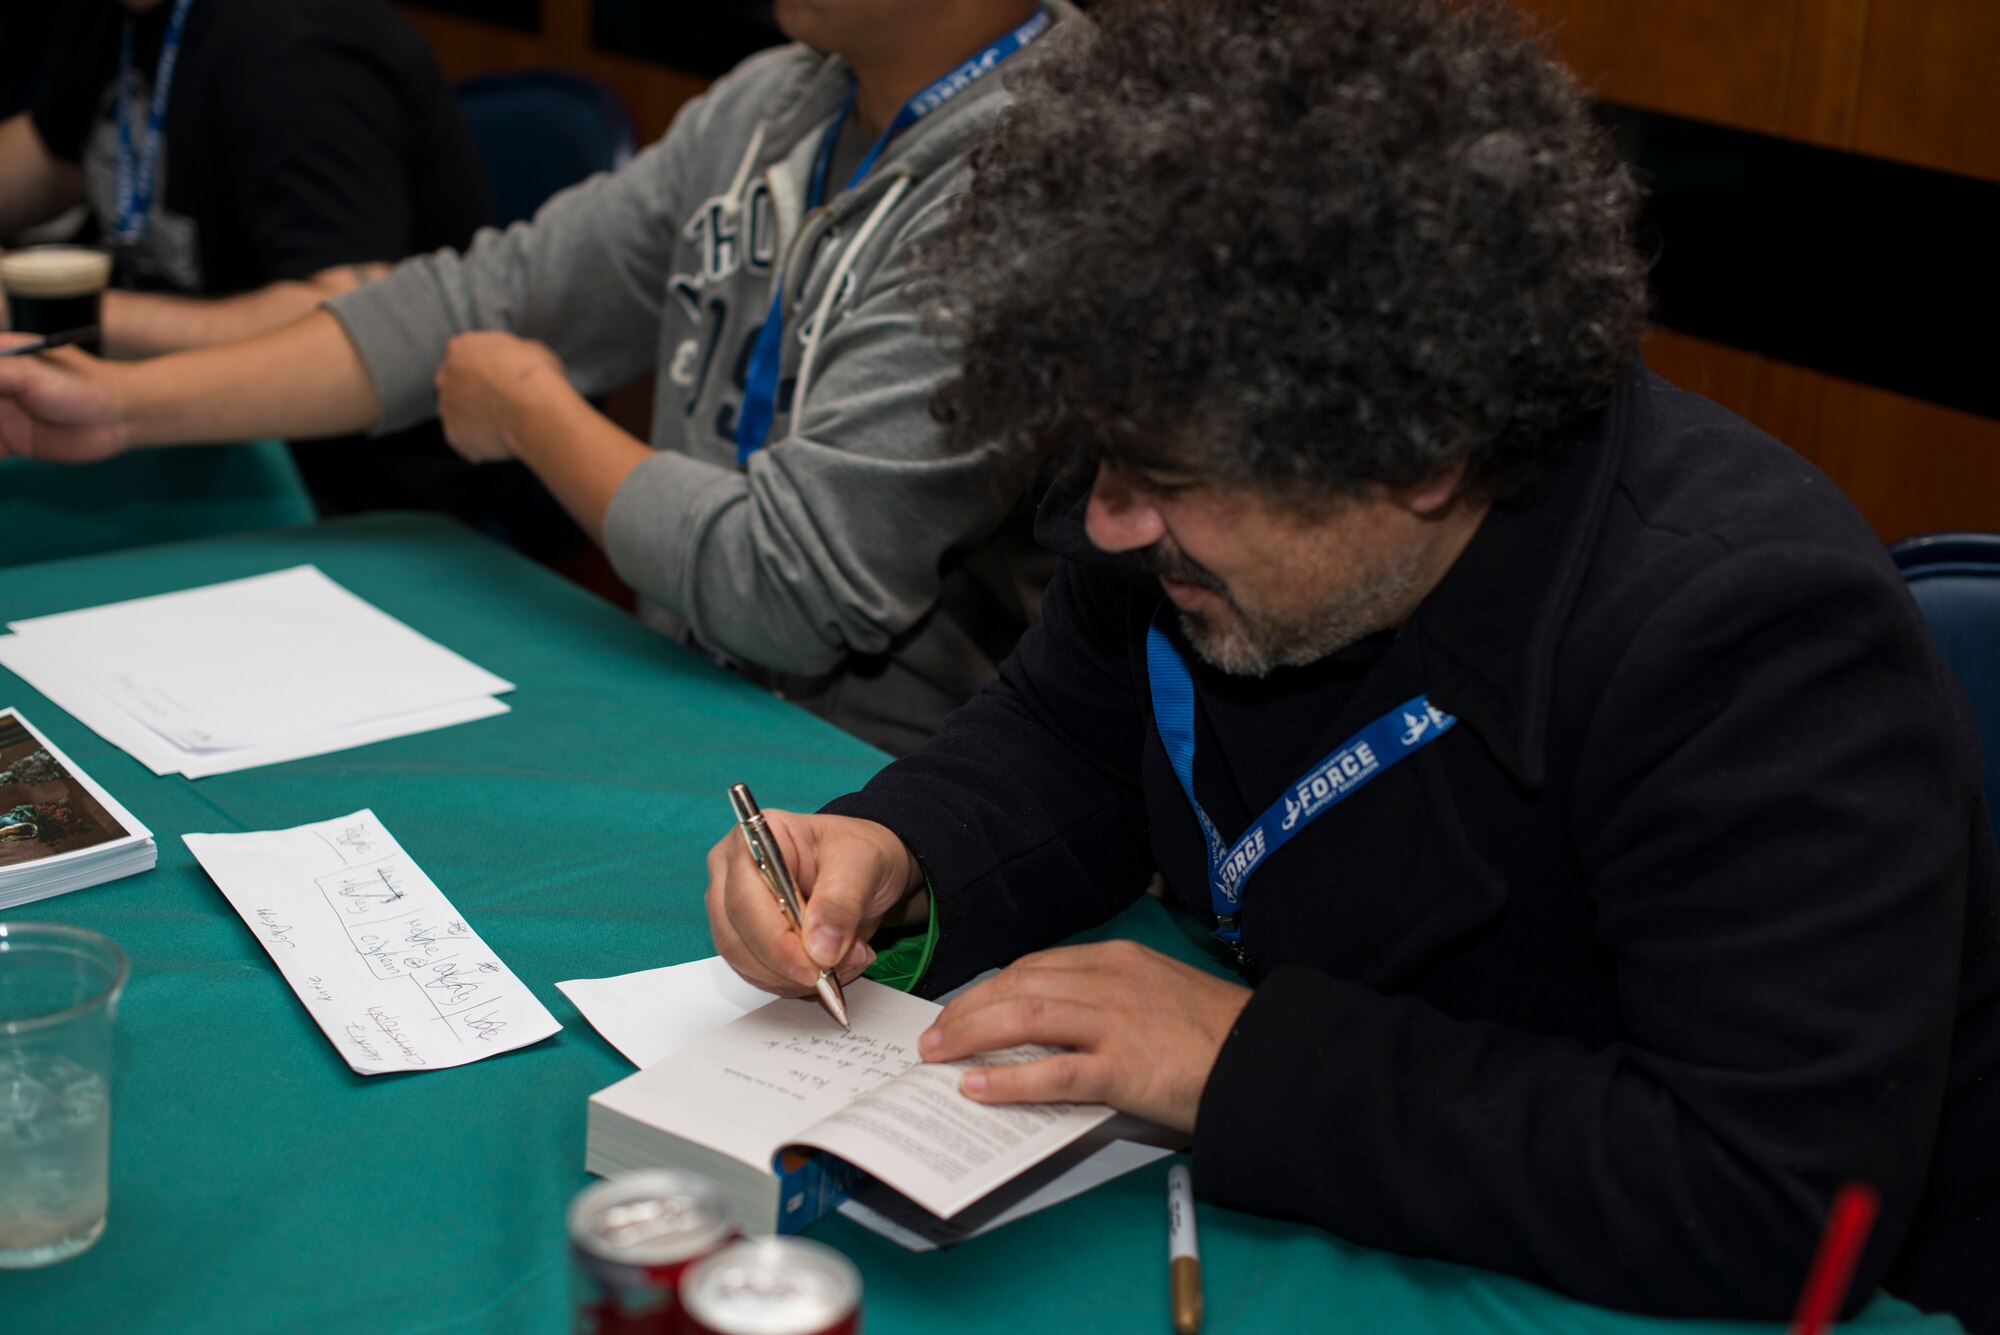 Miltos Yerolemou, film actor, autographs a Game of Thrones book during Operation Sci-Fi Con at Spangdahlem Air Base, Germany, Nov. 23, 2015. Yerolemou played Syrio Forel, sword master, in the TV adaptation of the book, Game of Thrones. (U.S. Air Force photo by Staff Sgt. Christopher Ruano/Released)
